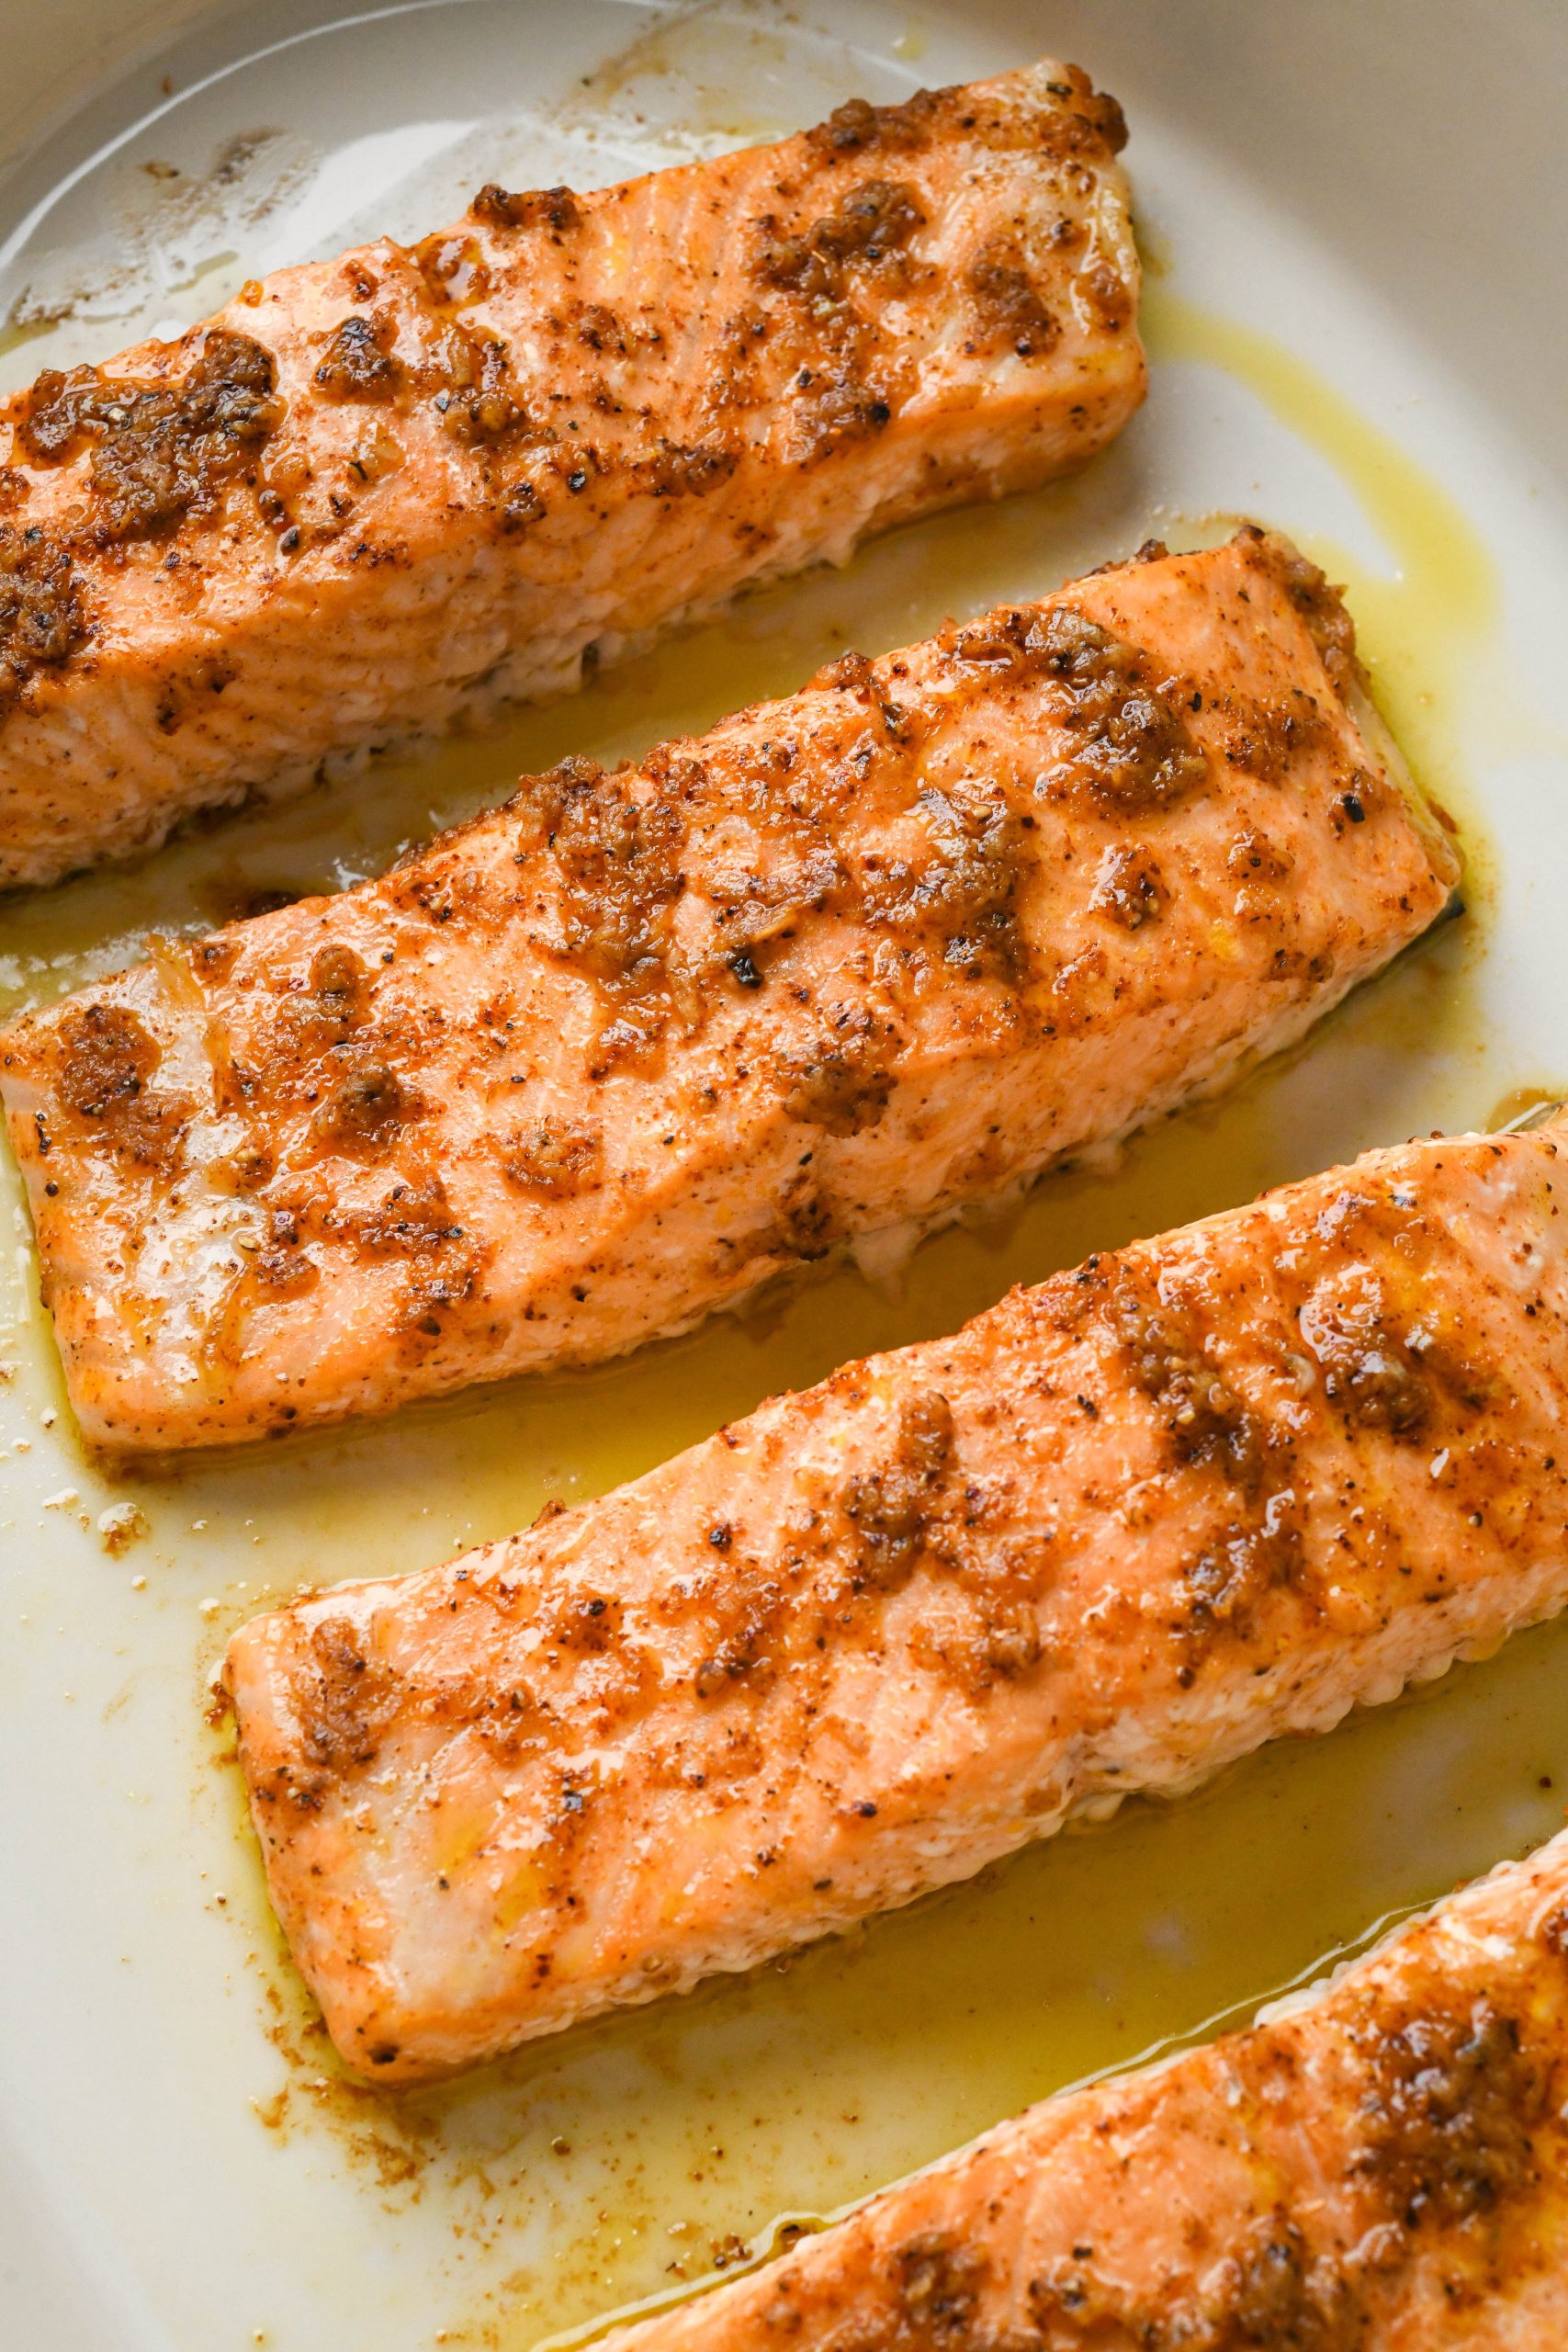 How to make baked salmon: Coated salmon fillets after baking in a baking dish.